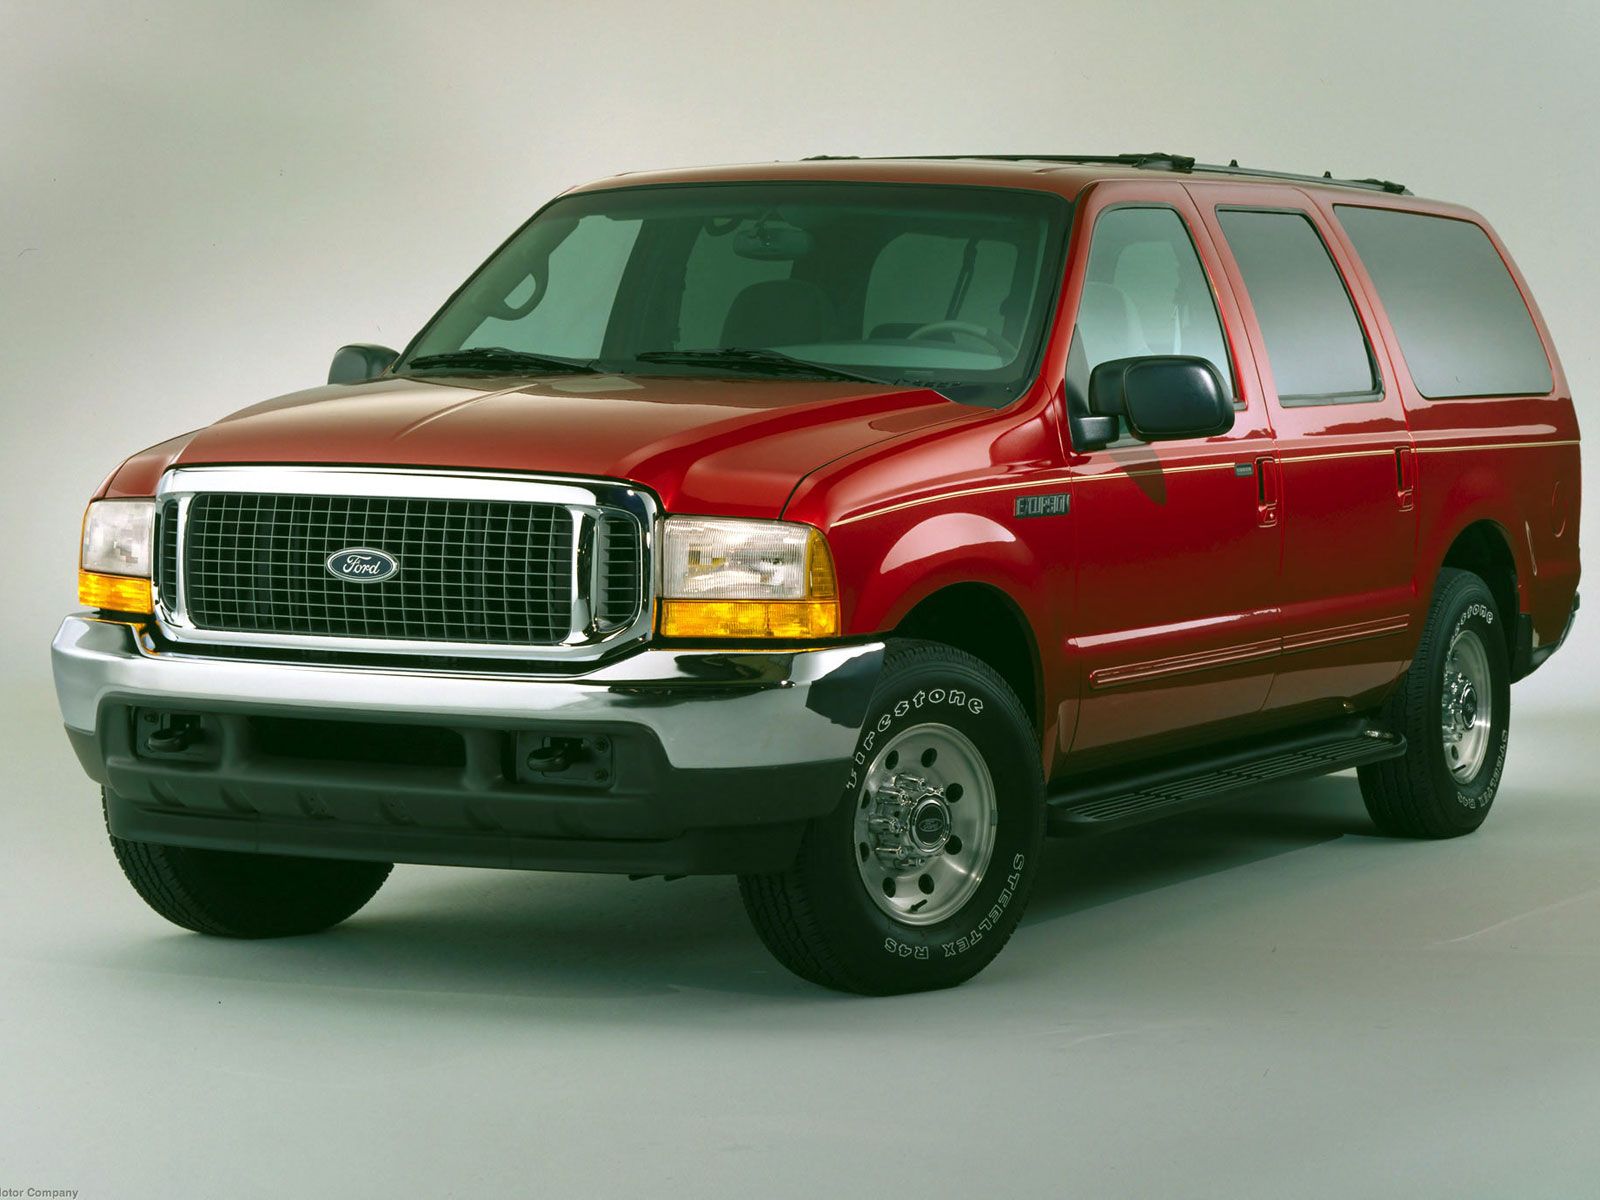 2005 ford excursion limited diesel towing capacity